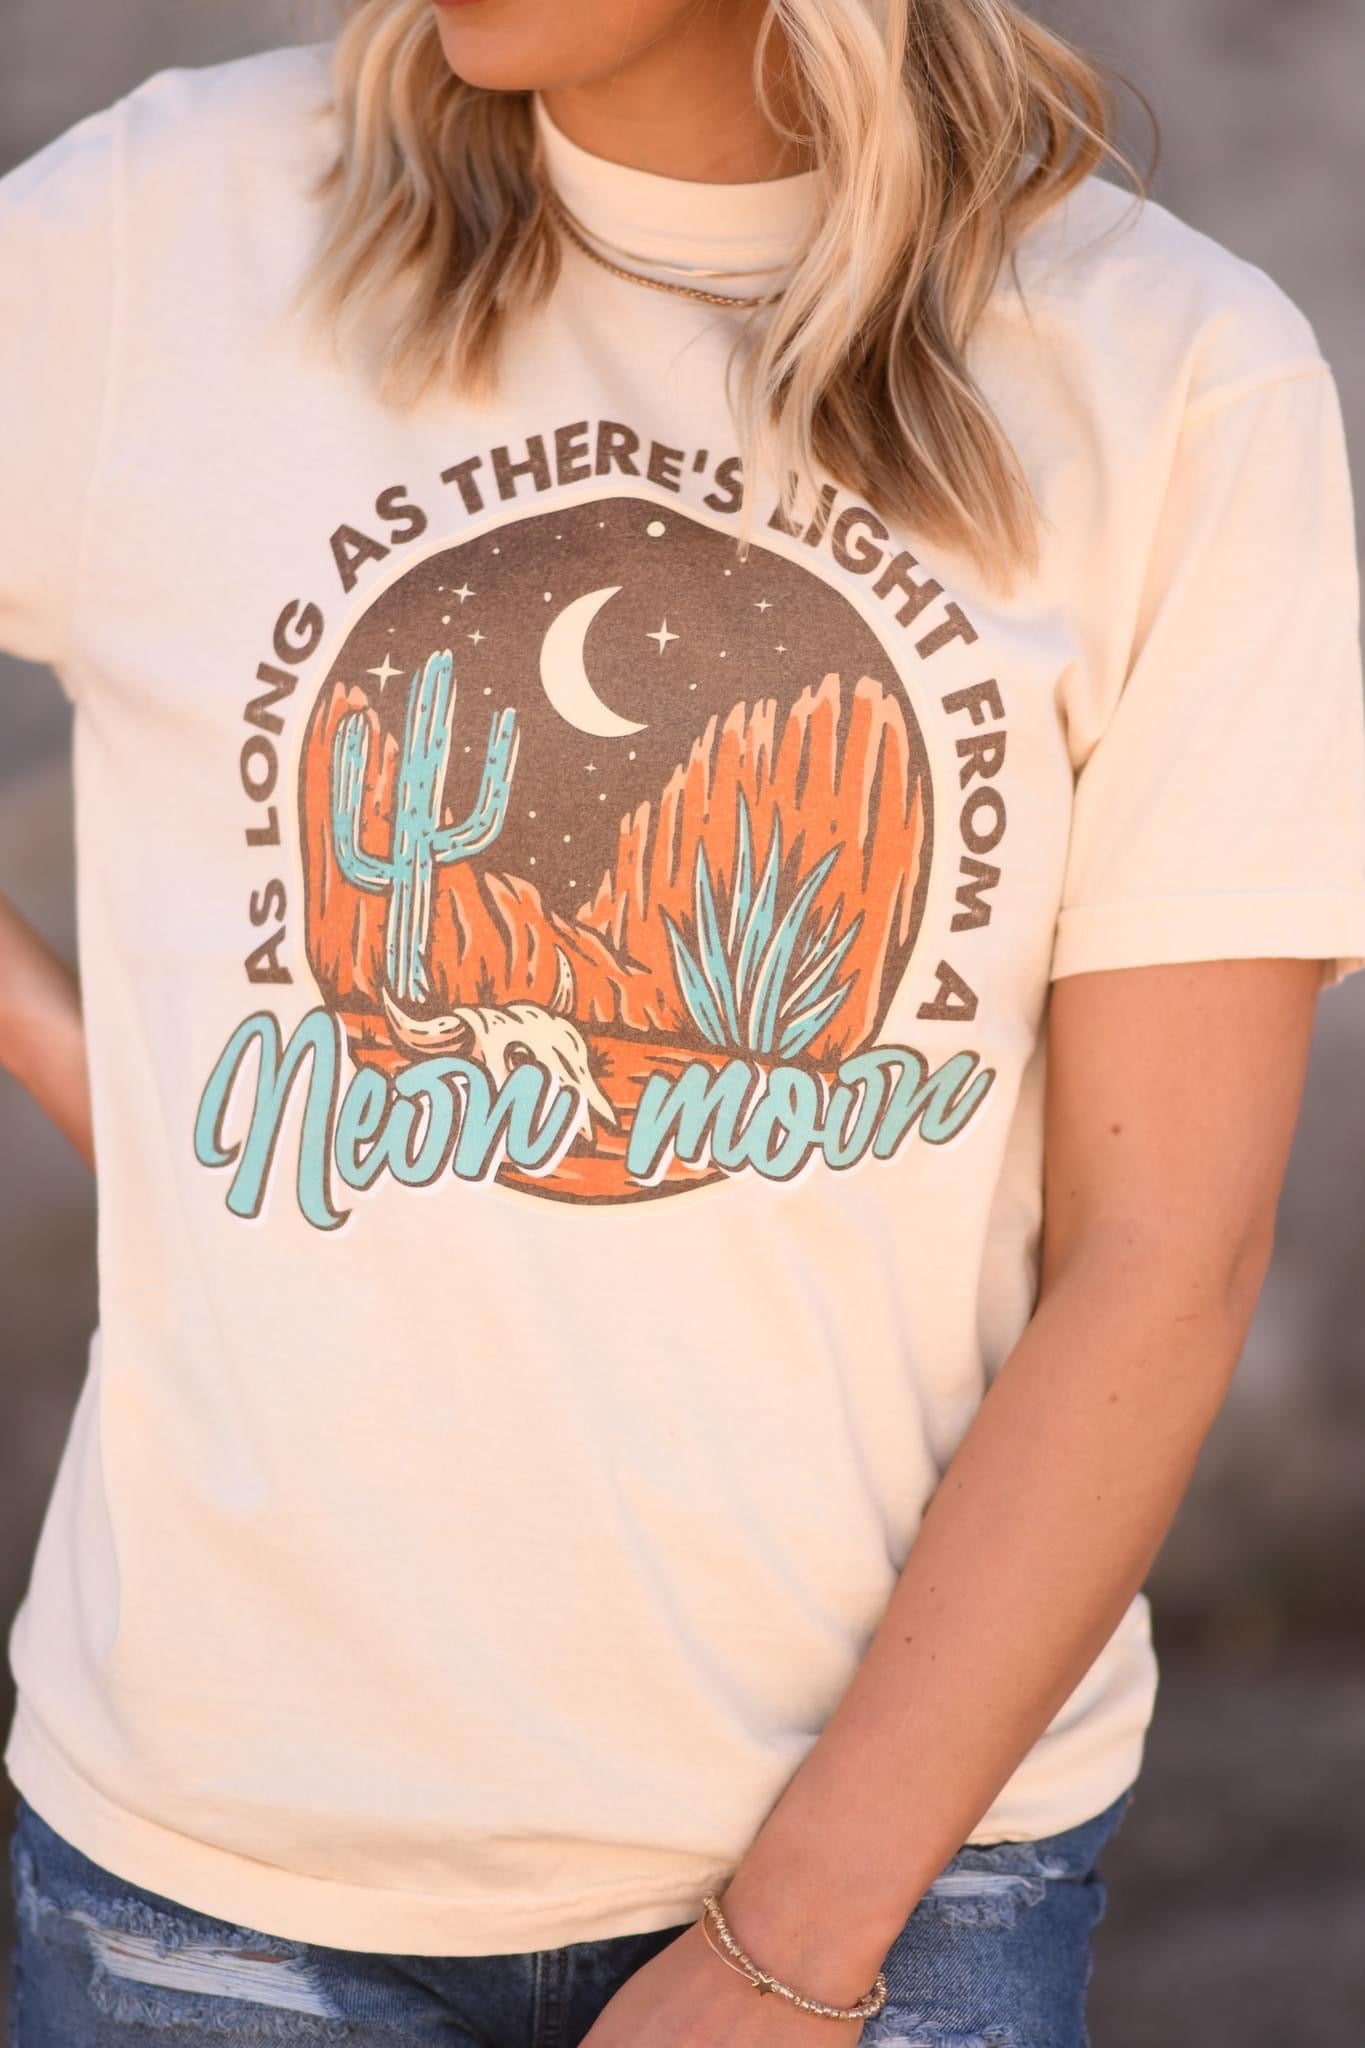 🌵🌙As Long As There's Light From A Neon Moon!🌙🌵